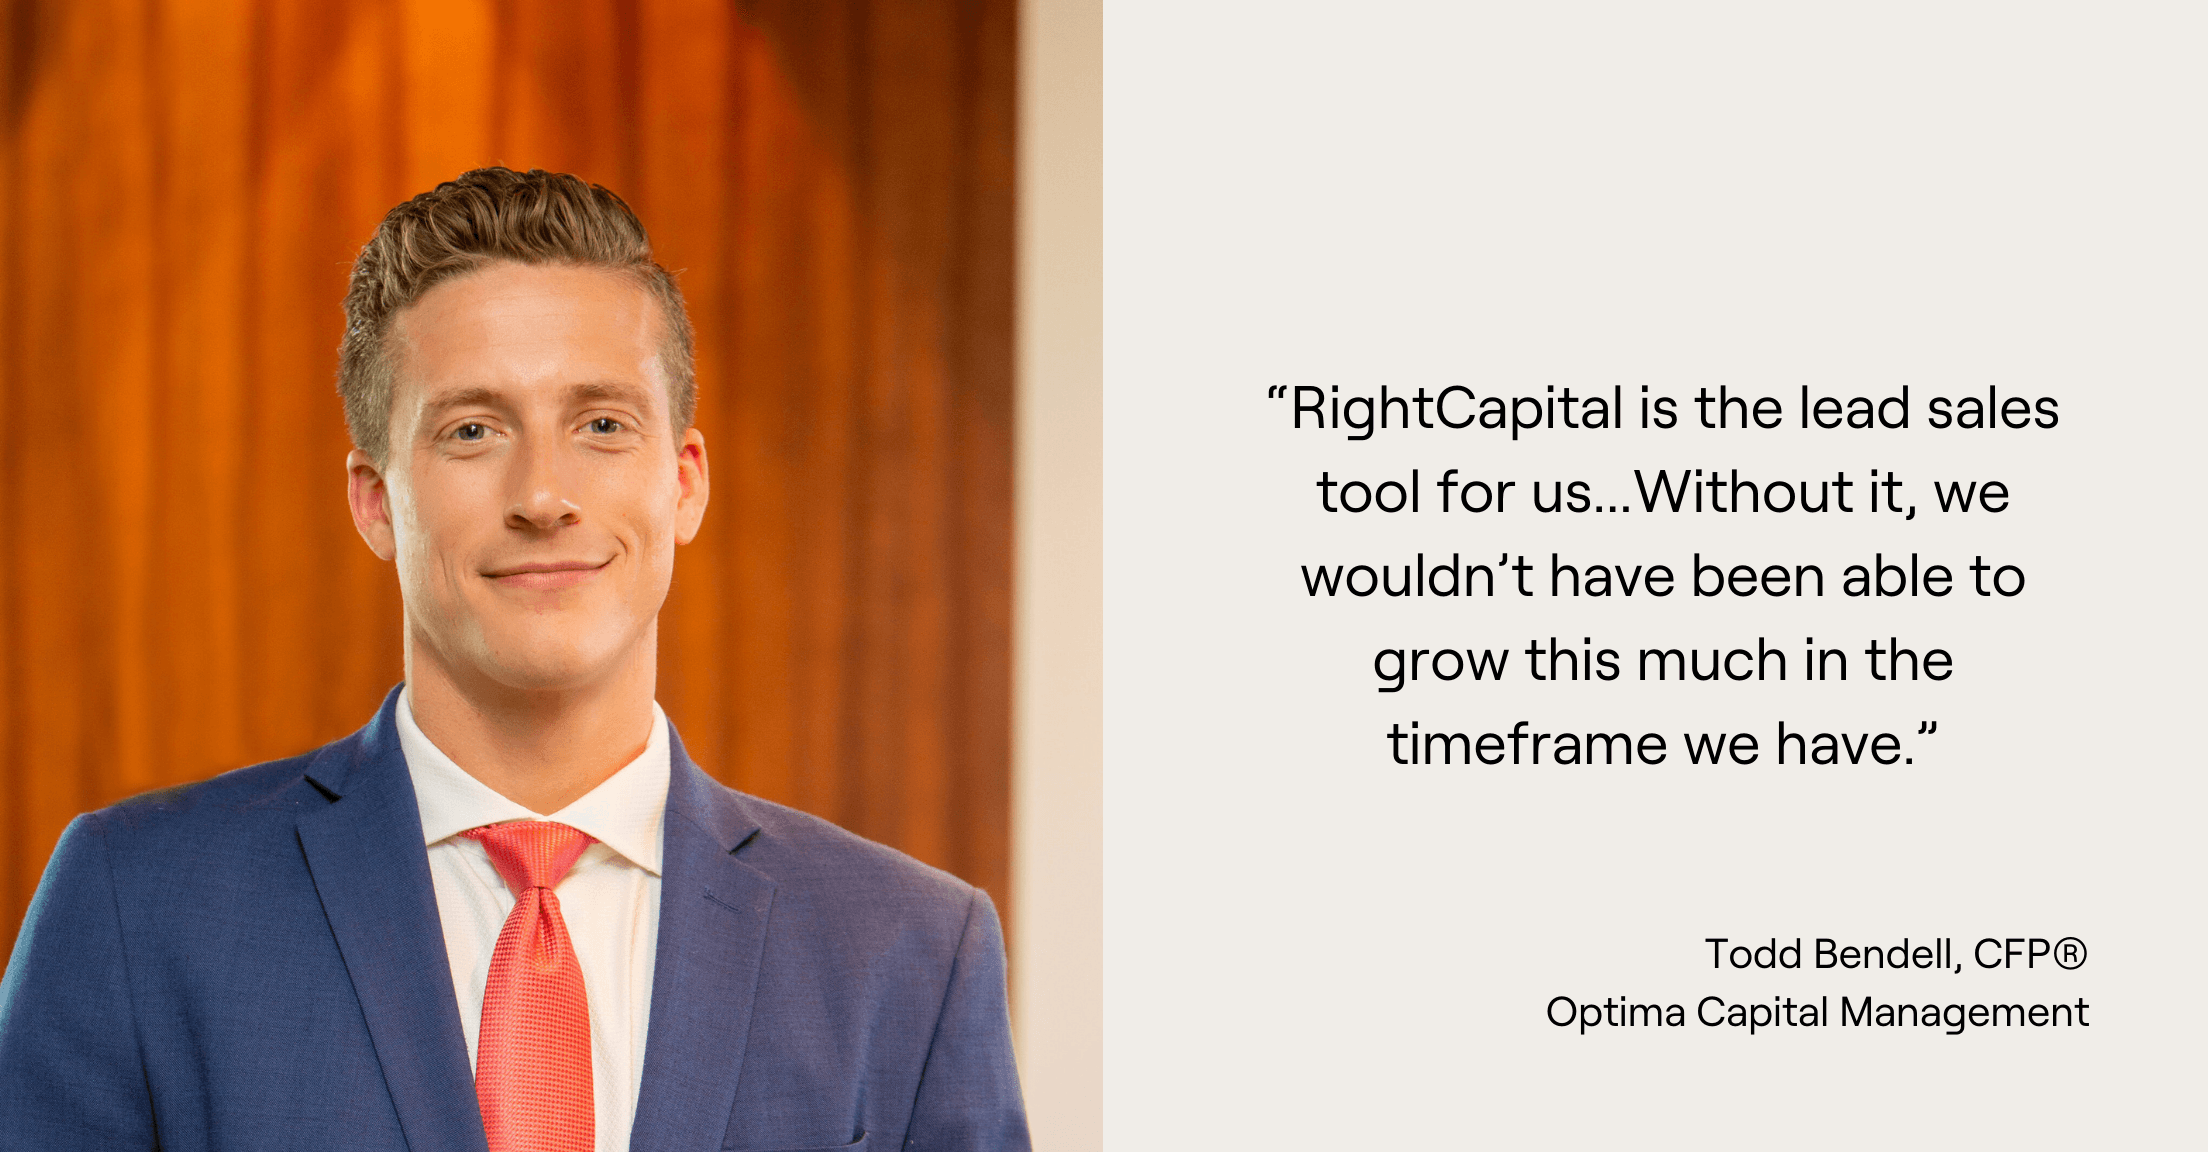 Headshot of Todd Bendell of Optima Capital Management with the quote, “RightCapital is the lead sales tool for us...Without it, we wouldn’t have been able to grow this much in the timeframe we have.”